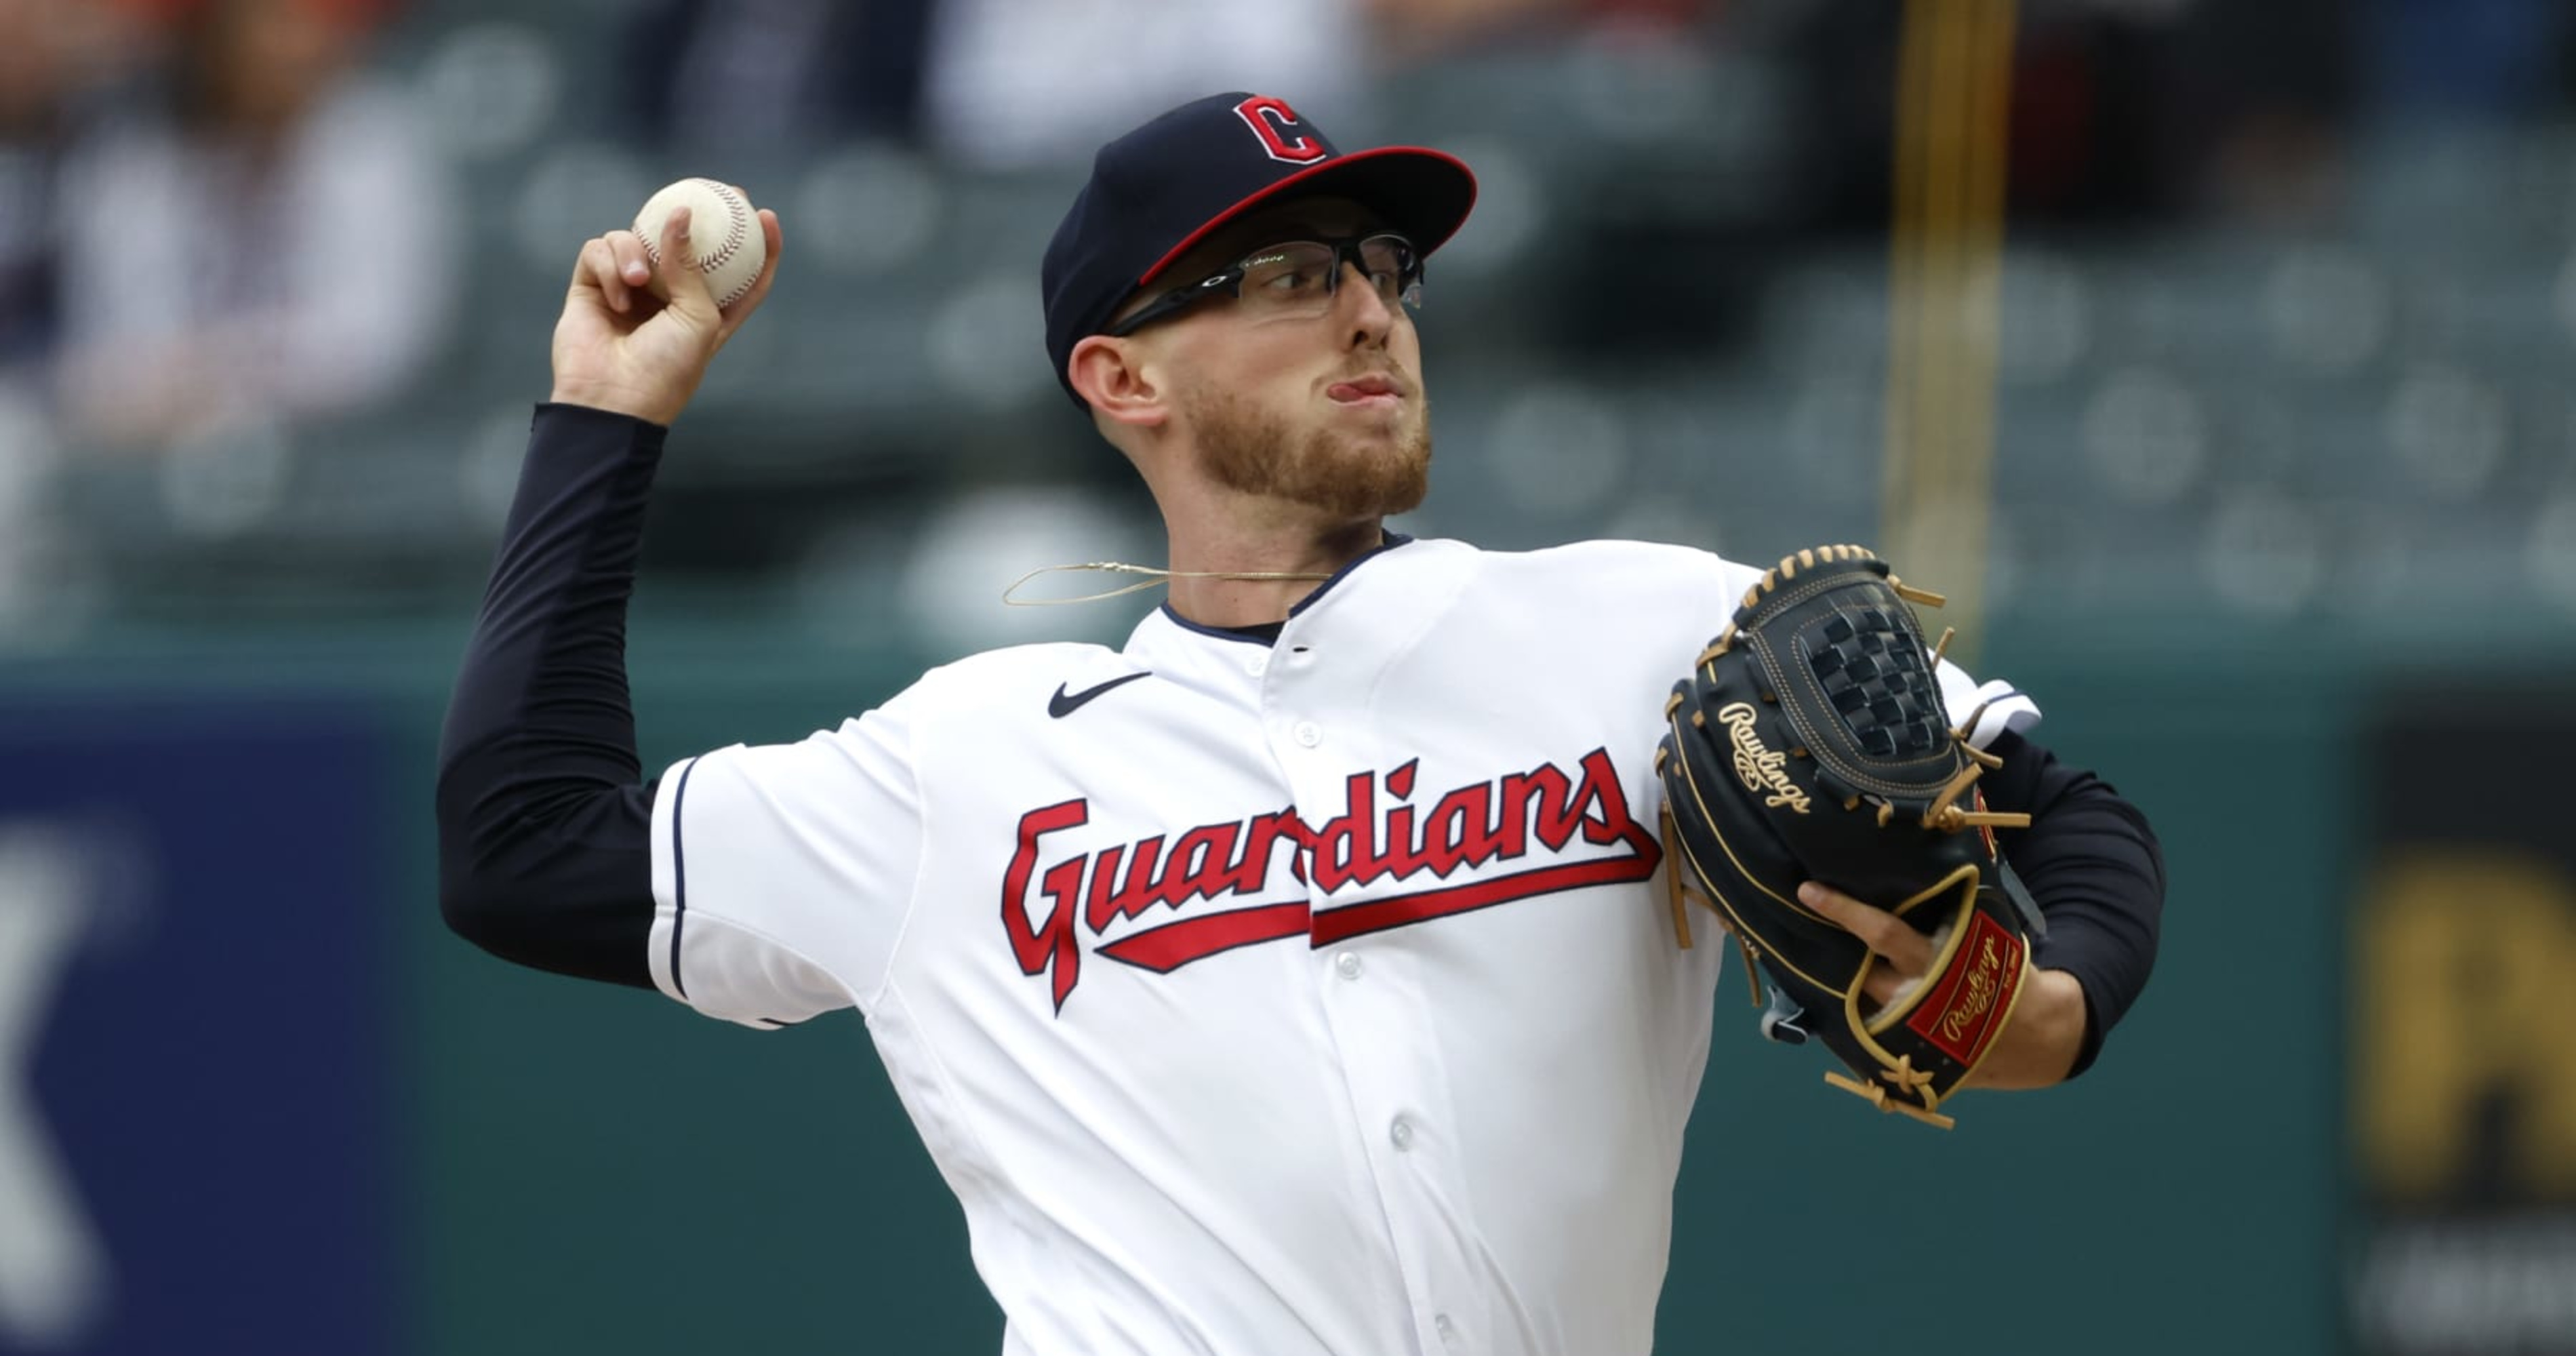 Cleveland Indians: Players who could make the 2018 All-Star team